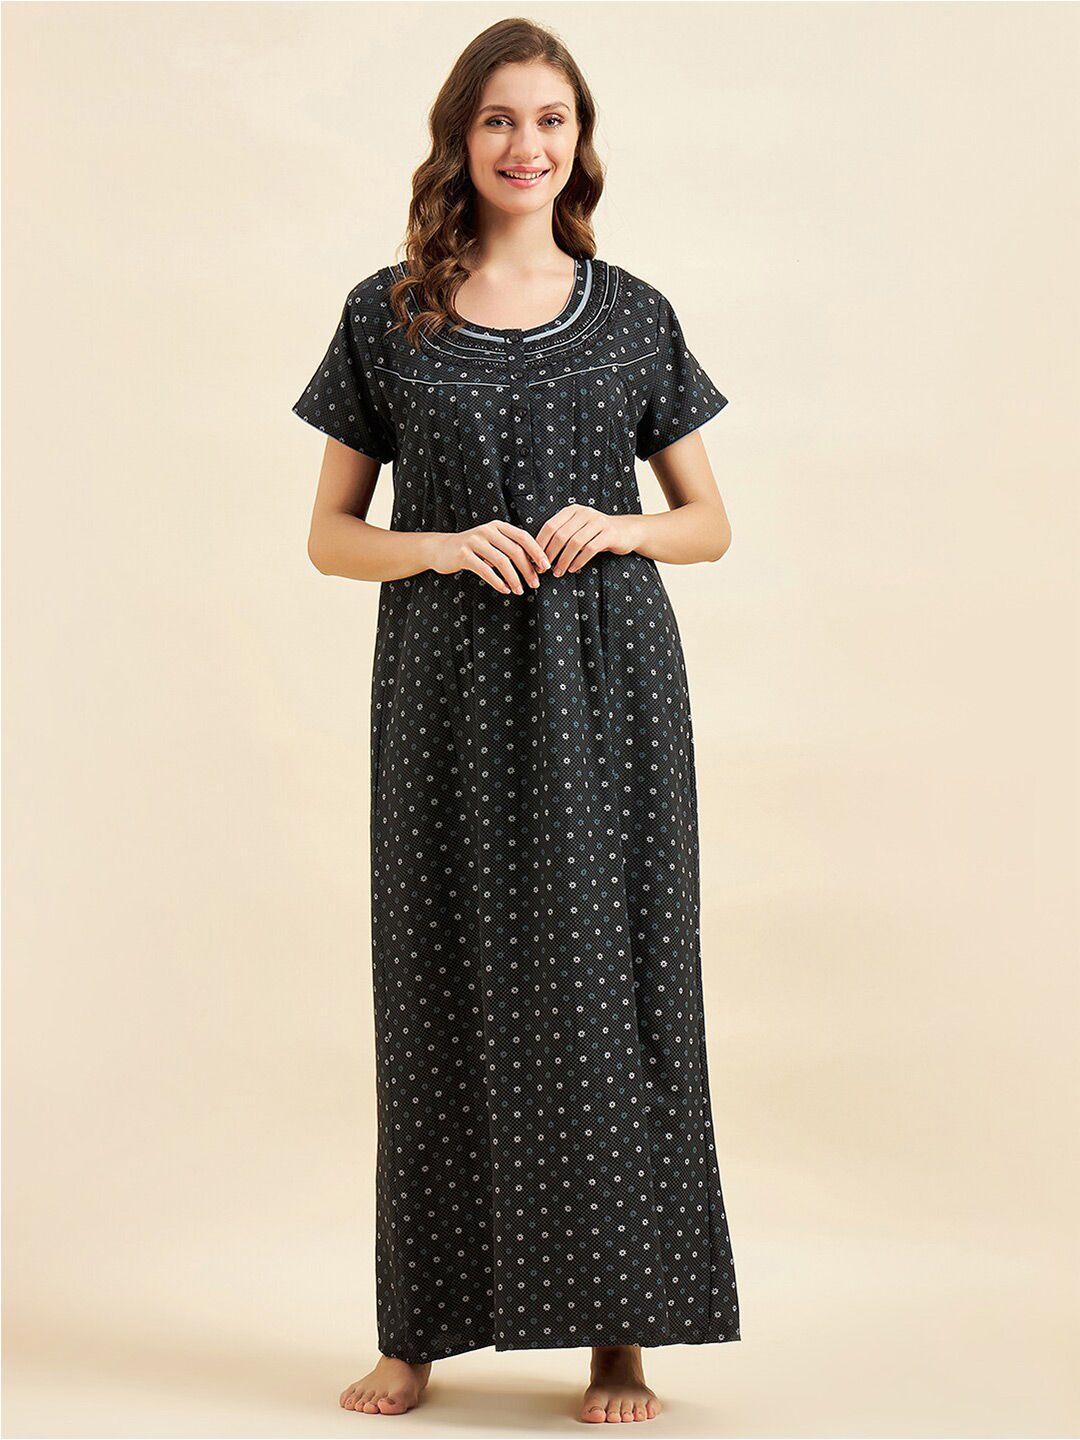 sweet-dreams-black-&-white-floral-printed-maxi-nightdress